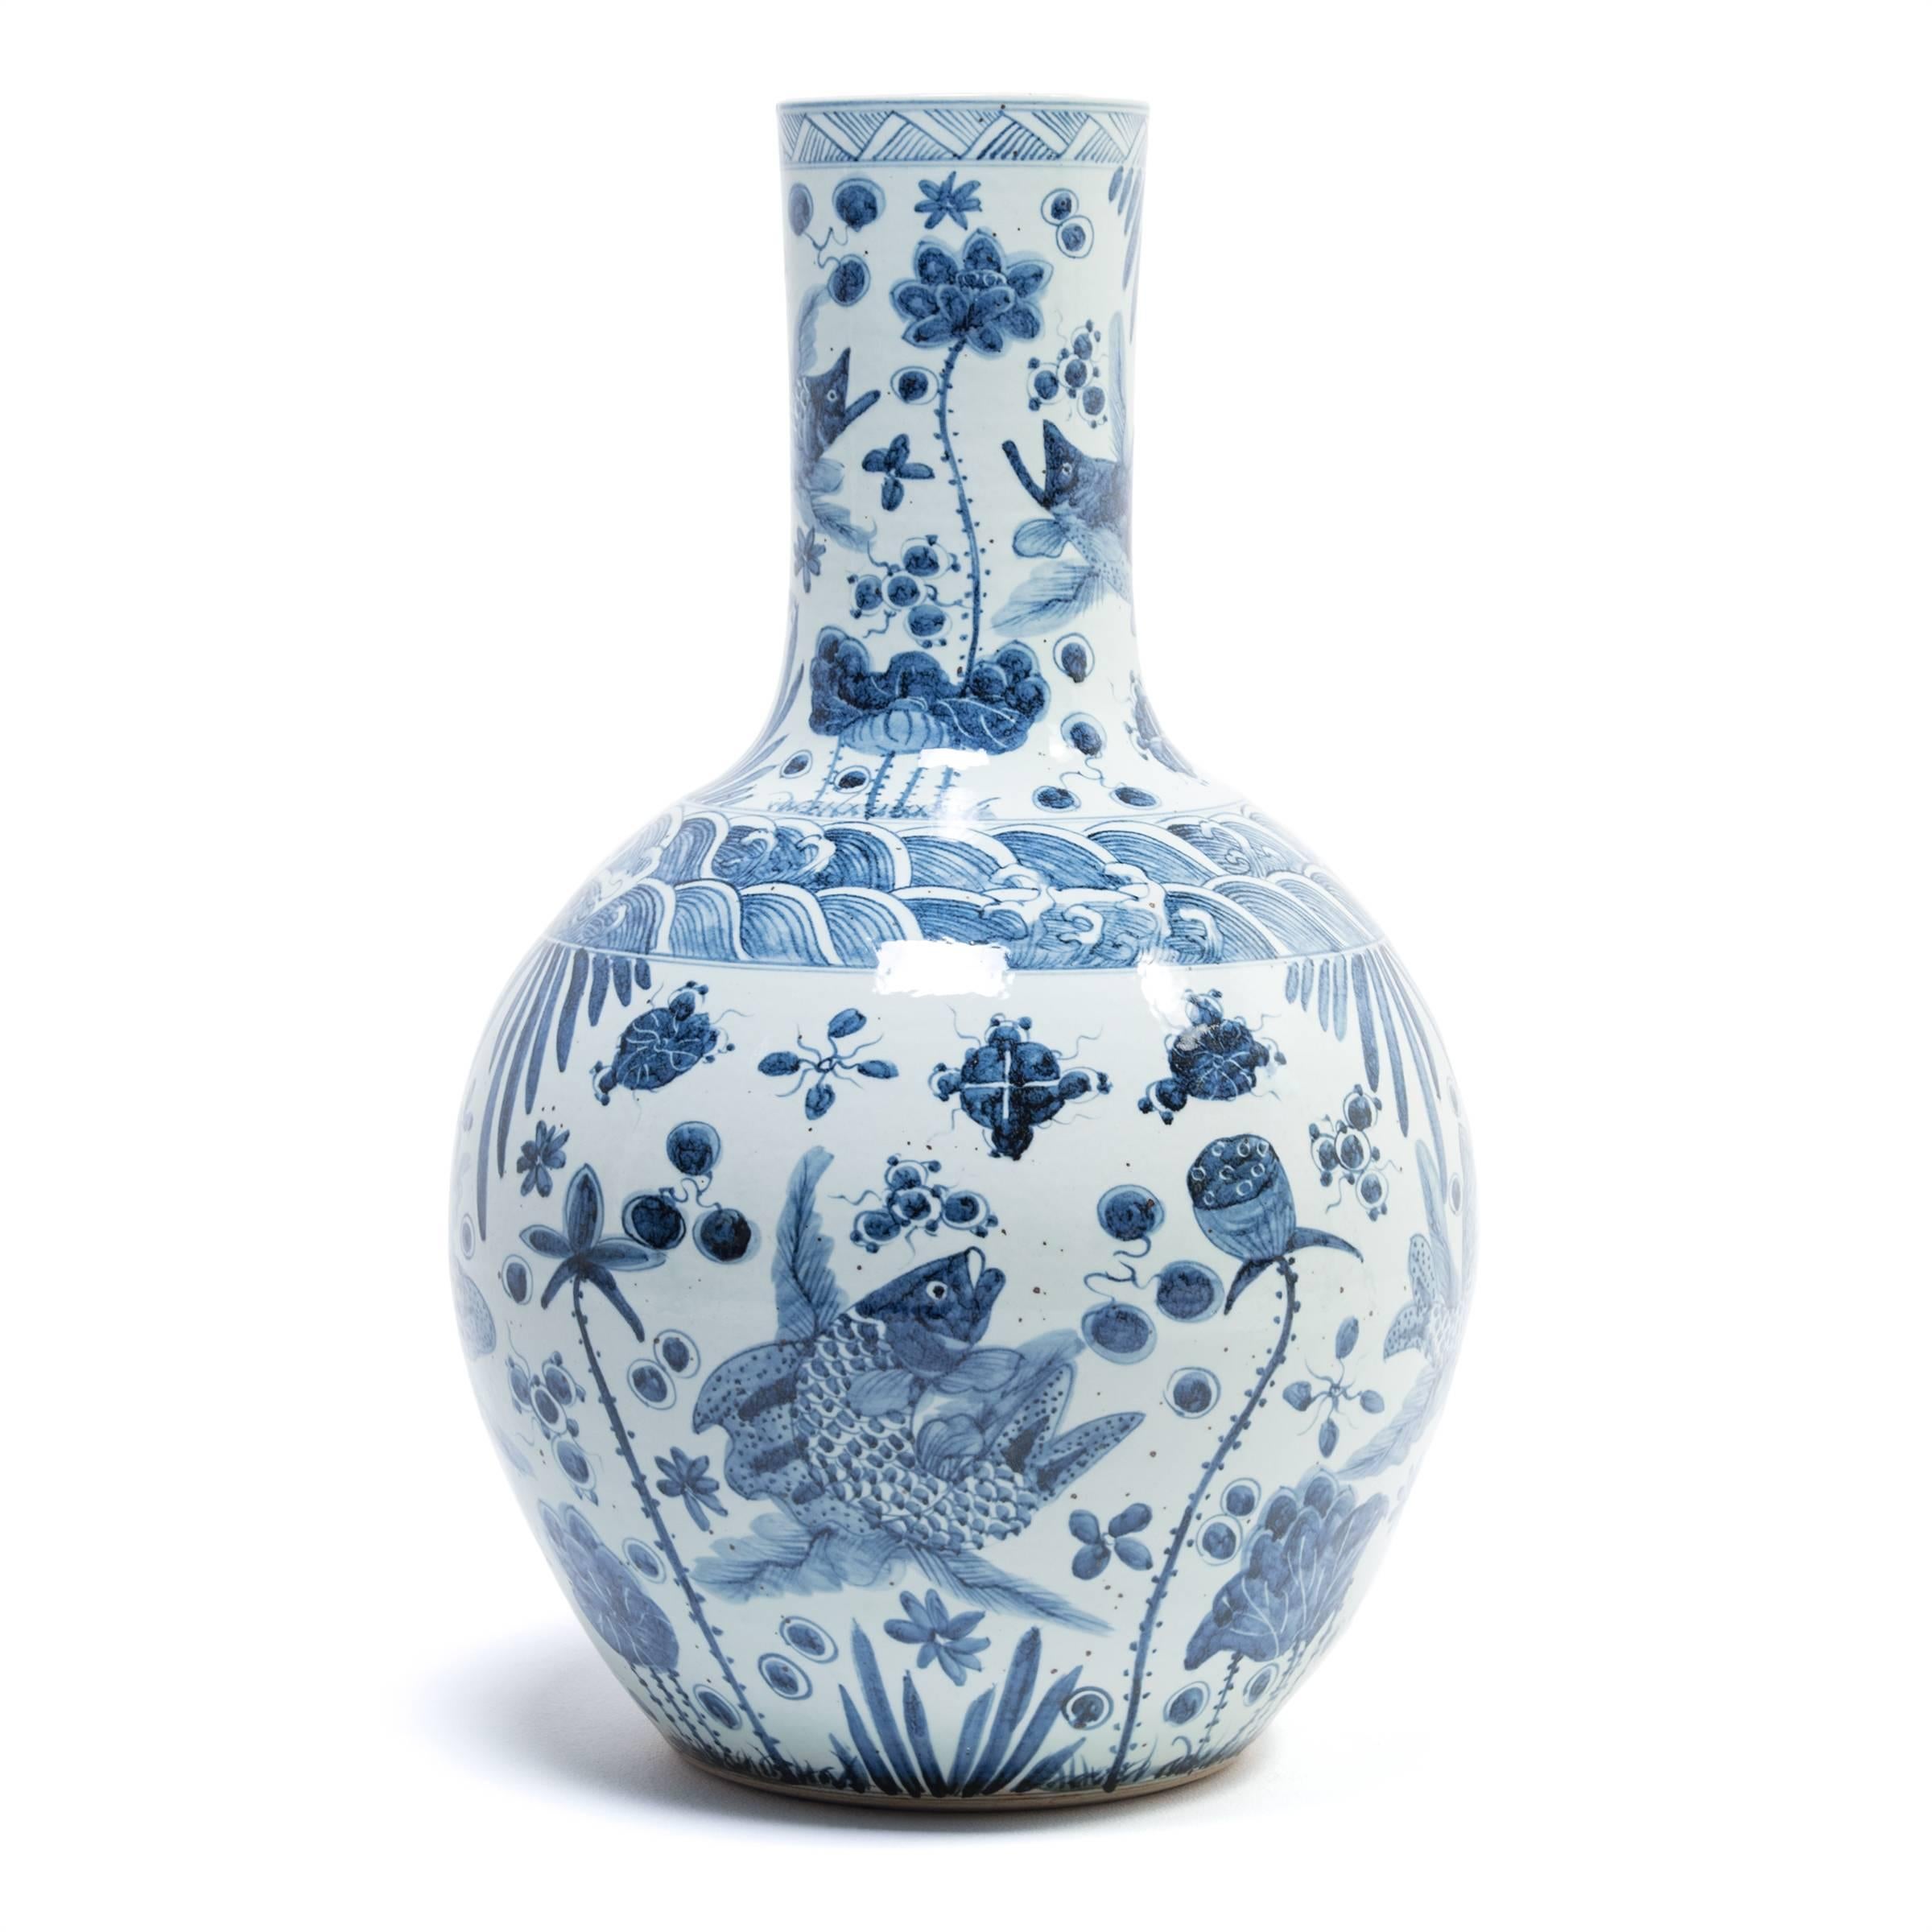 Revered for centuries for its elegant designs and rich cobalt blue and pure white colors, traditional Chinese blue-and-white porcelain lives on in this hand-painted bottleneck vase. Delicately rendered with koi amidst fanciful waves, the vase's